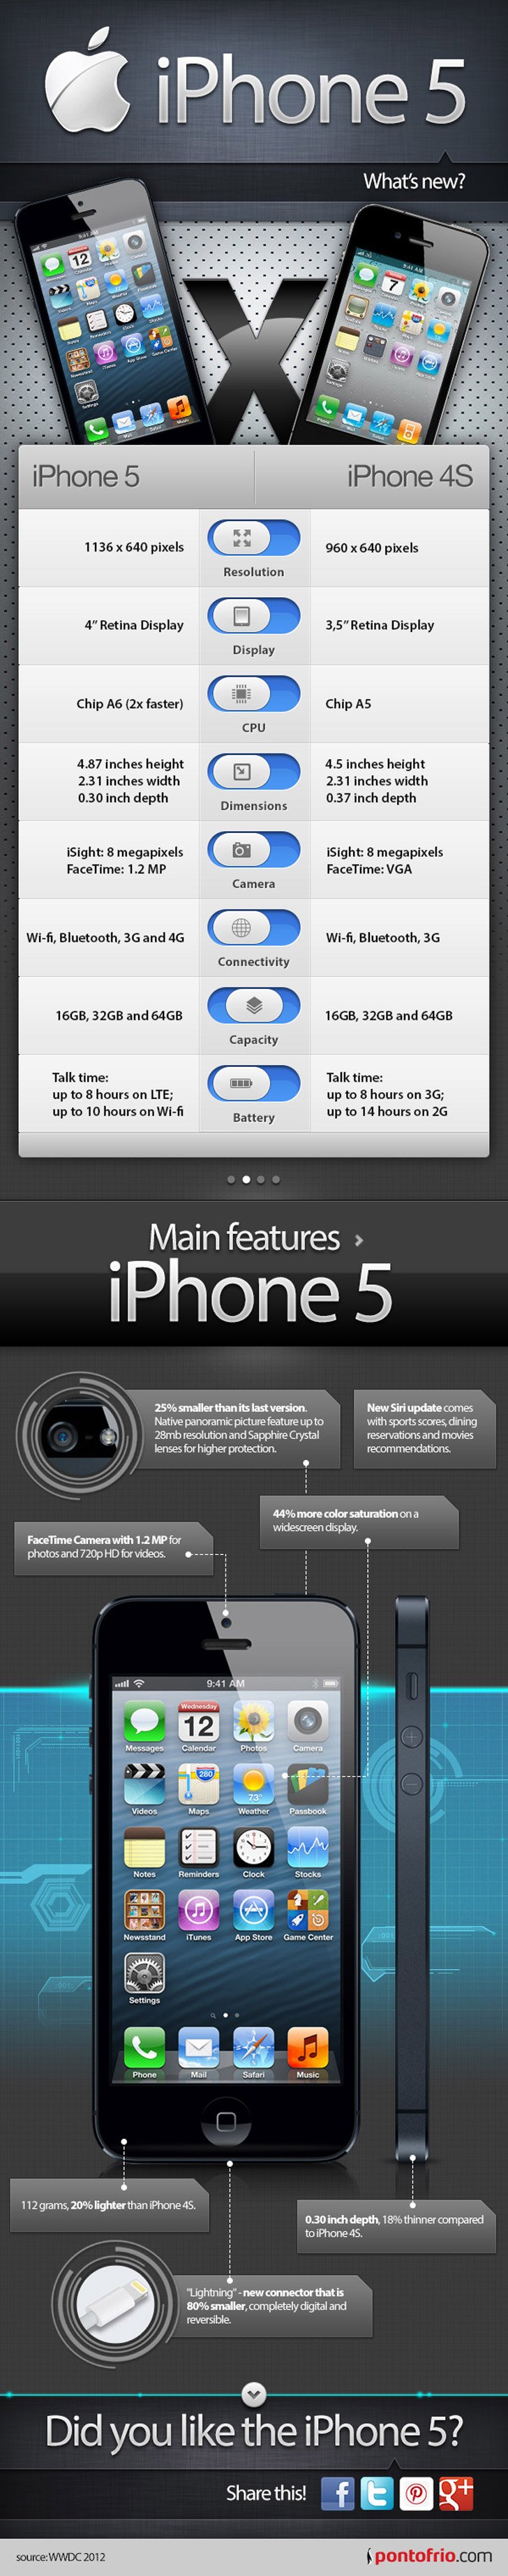 iPhone 5 vs iPhone 4S nfographic